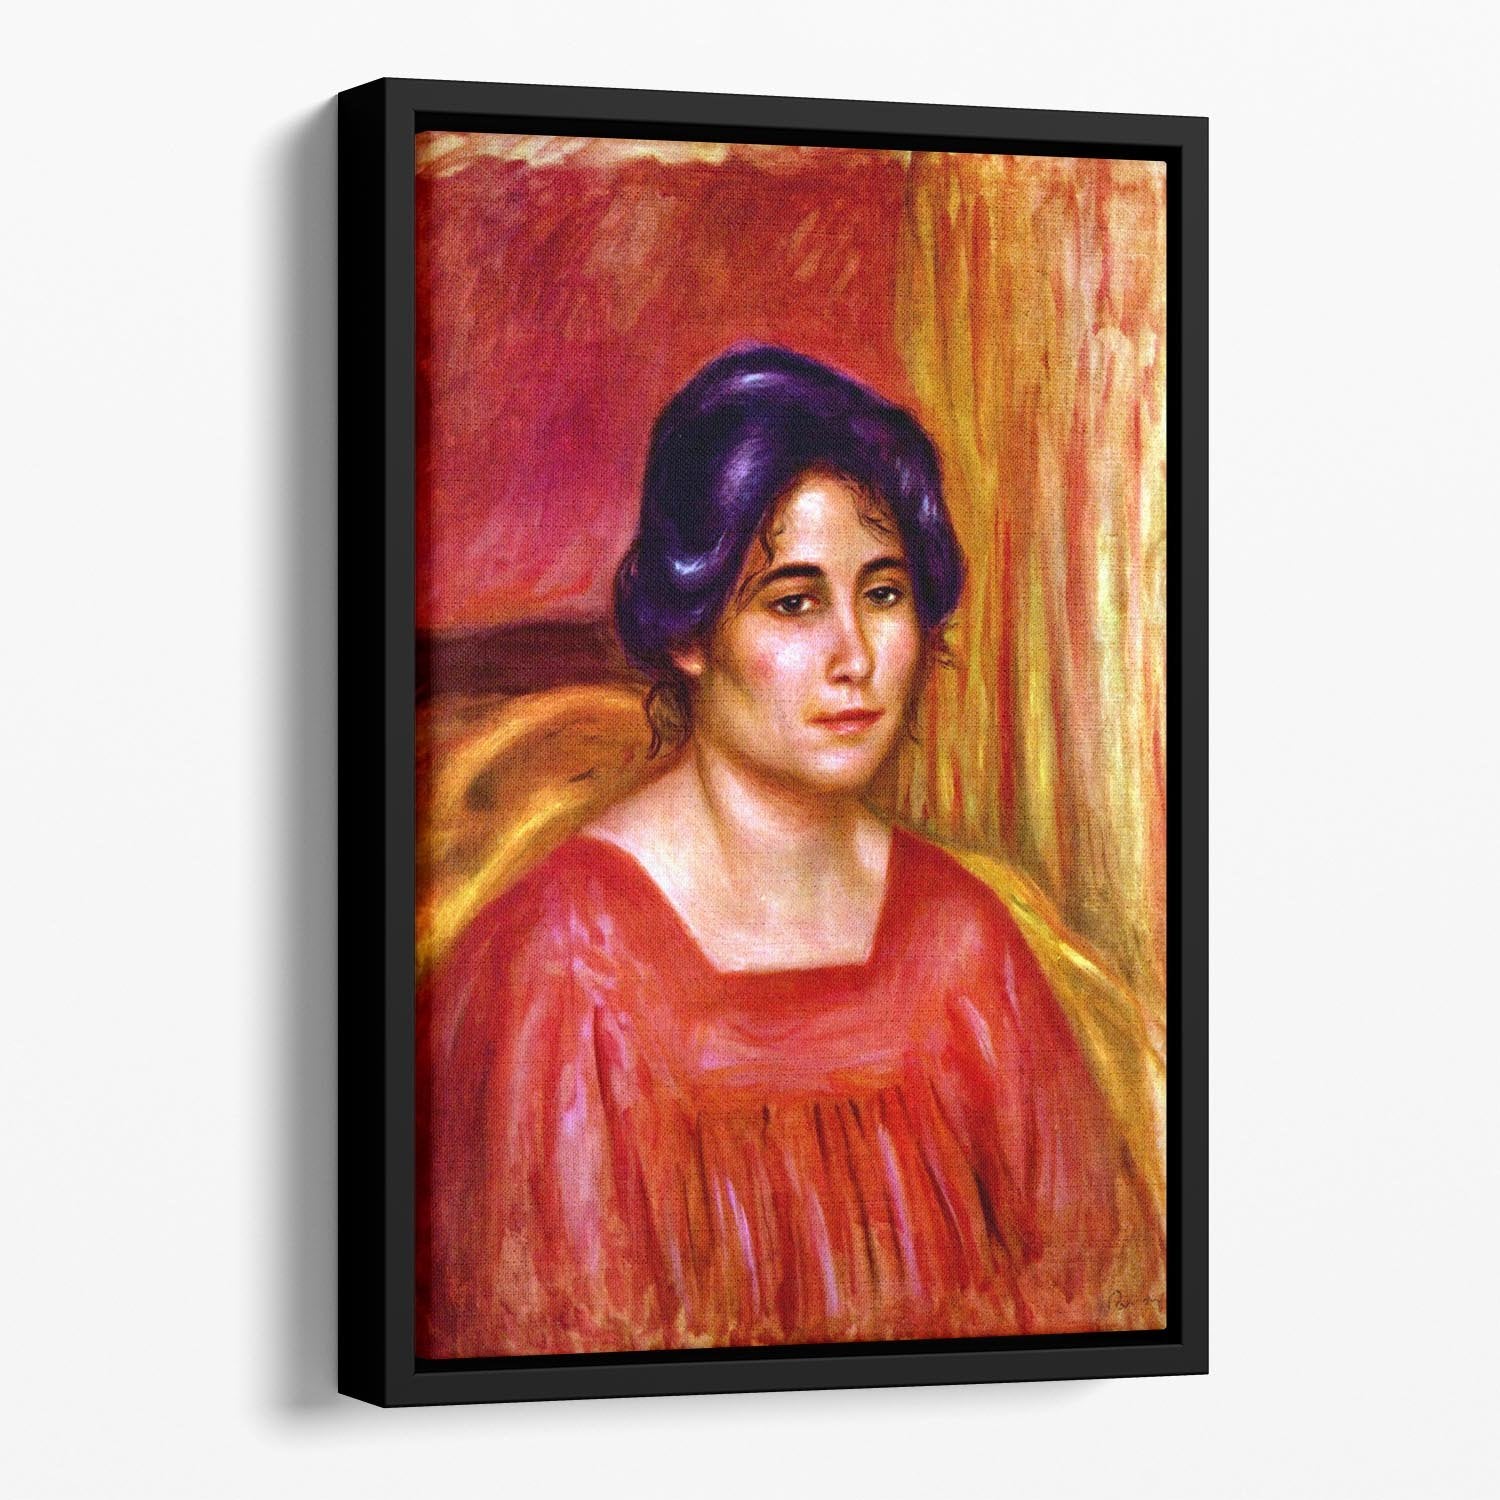 Gabrielle with red blouse by Renoir Floating Framed Canvas